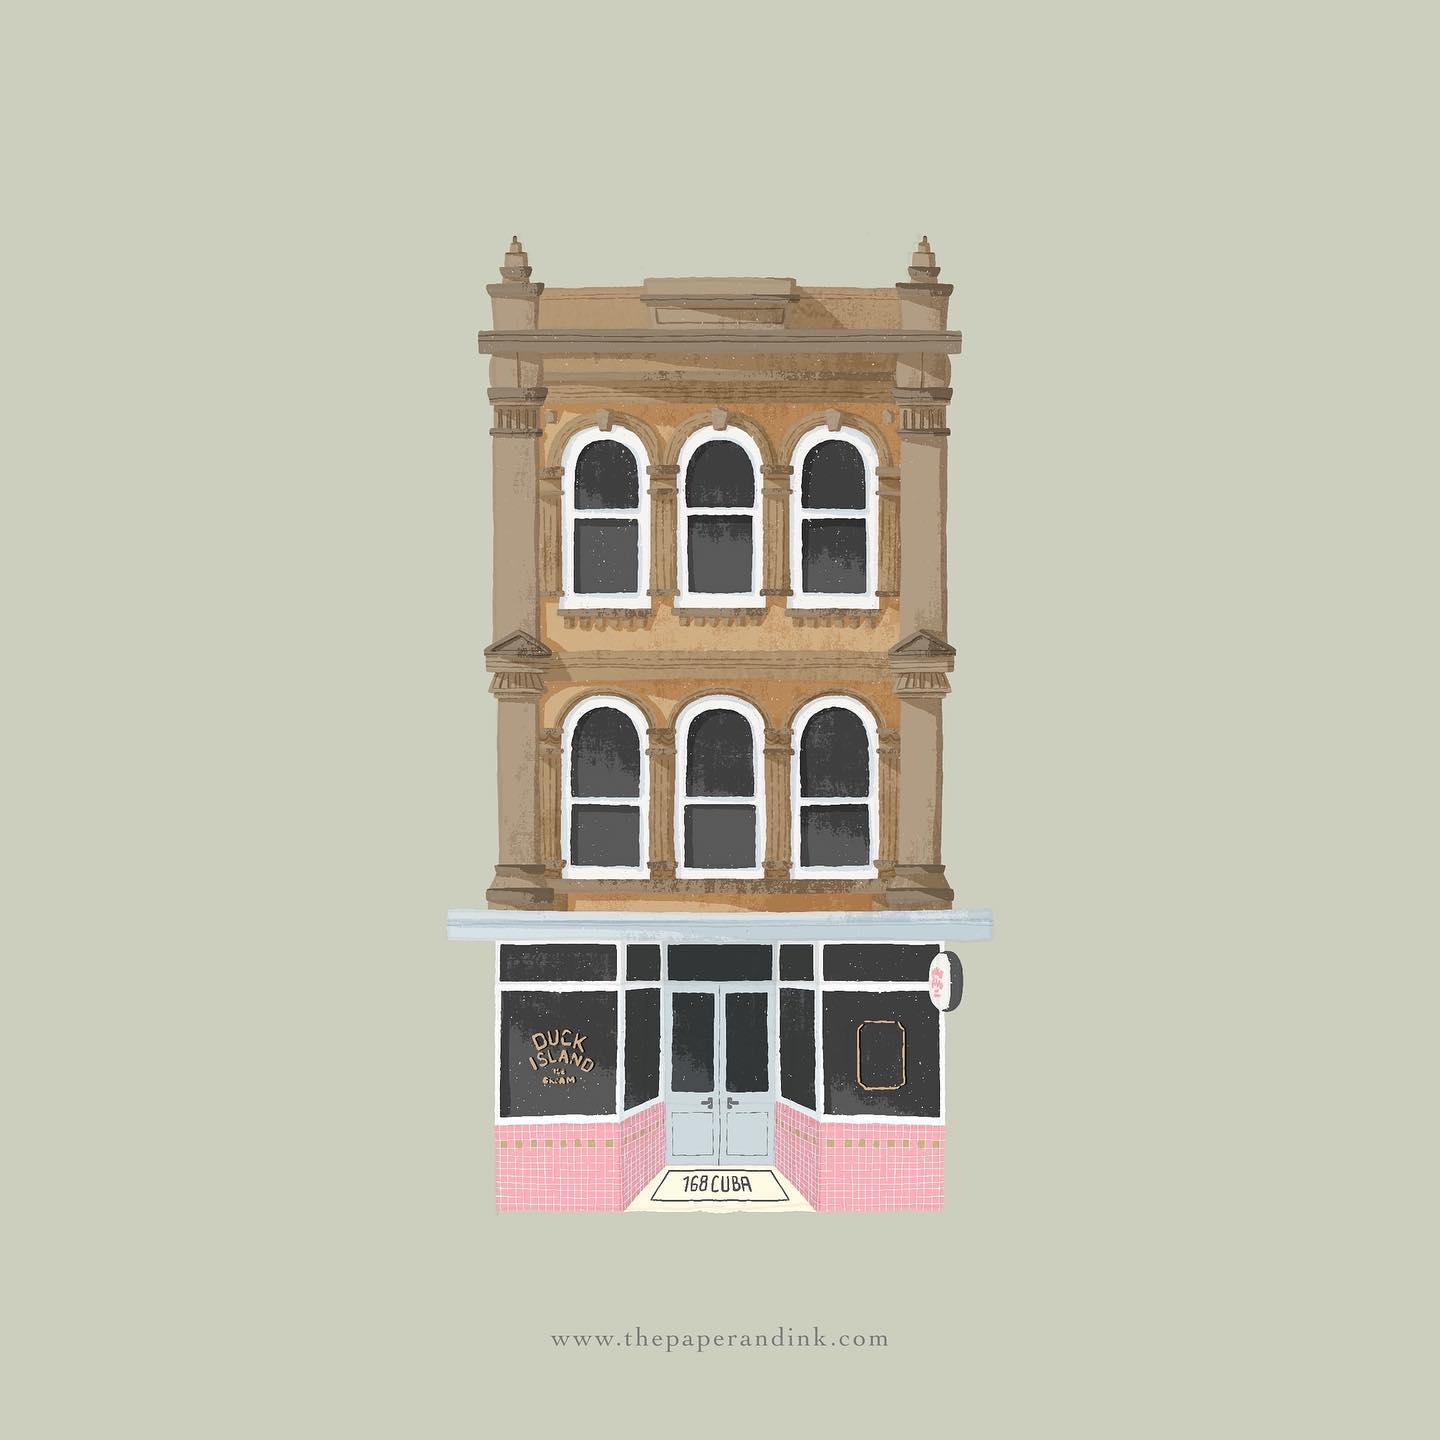 This shop is literally just at the corner from my work. When the previous store closed and they did a renovation to prepare for a new store opening, I saw pink tiles. I wondered what would open here next, every time I walk past it on my way home.⁠
⁠
Then one day, I saw a glimpse of the front window sticker. It's @duckislandicecream !!! Rejoice! ⁠
⁠
What's your favorite flavor?⁠
My one is actually Fairy Bread 😂⁠
⁠
Now that I think about it, I need a tub of it immediately.⁠
⁠
#thepaperandink⁠
⁠
#nzart #newzealandart #kiwiartist #nzcreators #newzealandartist #nzartists #nzcustom #madeinnewzealand #purenewzealand #wellymade ⁠
#newzealandfinds #nzmade #purenz #gottalovenz #shoplocalnz #wellingtonnz #doodlesofinstagram #dailydoodle #doodleart #doodling #drawingoftheday #doodledaily #sketchaday #doodlesketch #draws #dailydoodles #doodleaday #dailydrawing #procreateart